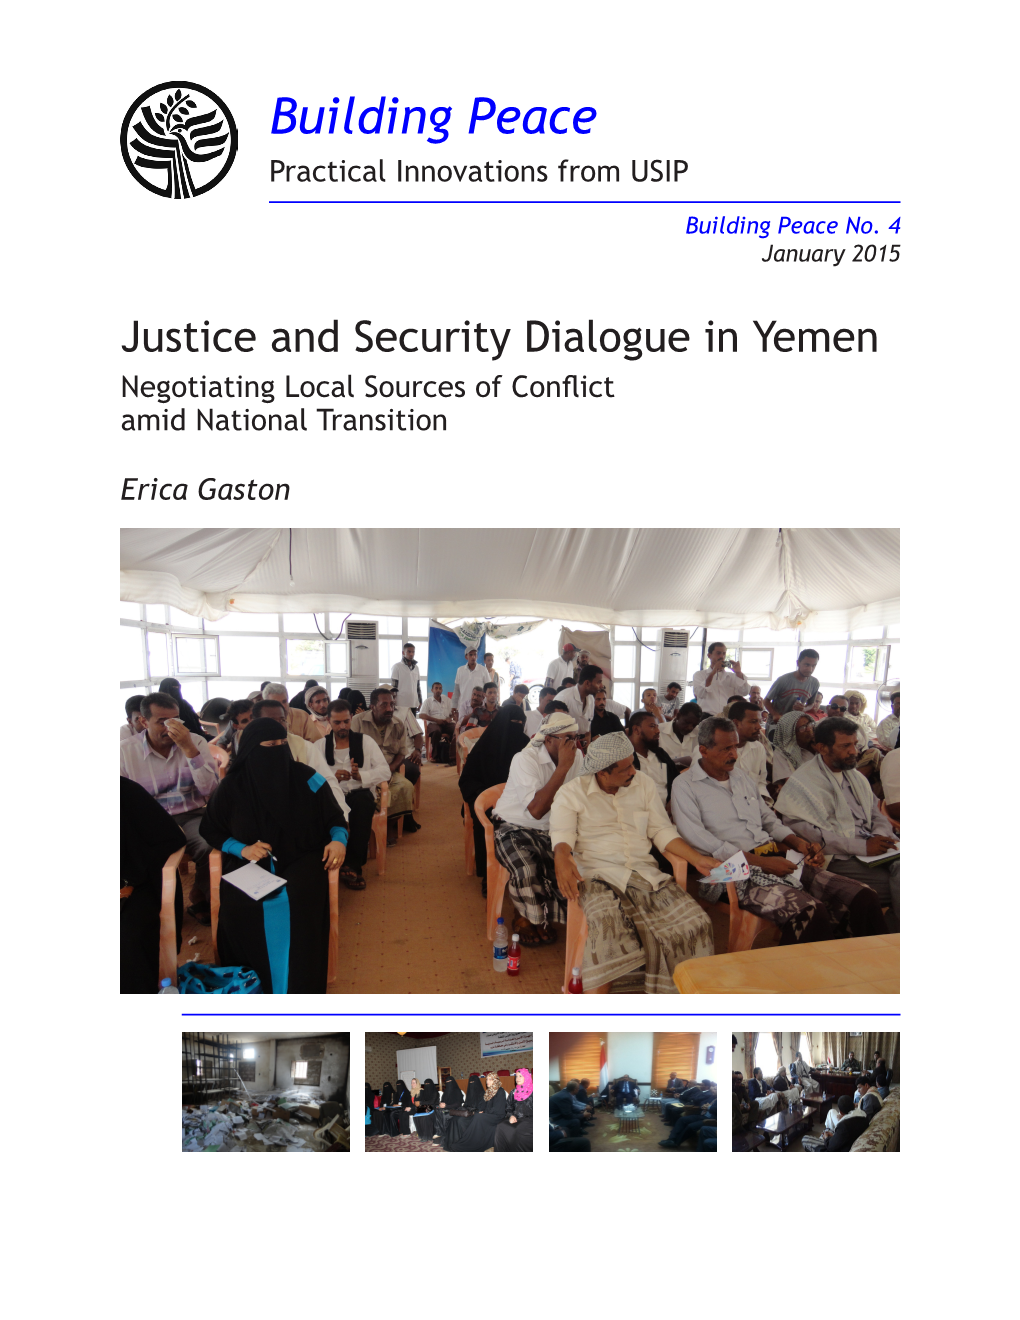 Justice and Security Dialogue in Yemen Negotiating Local Sources of Conflict Amid National Transition